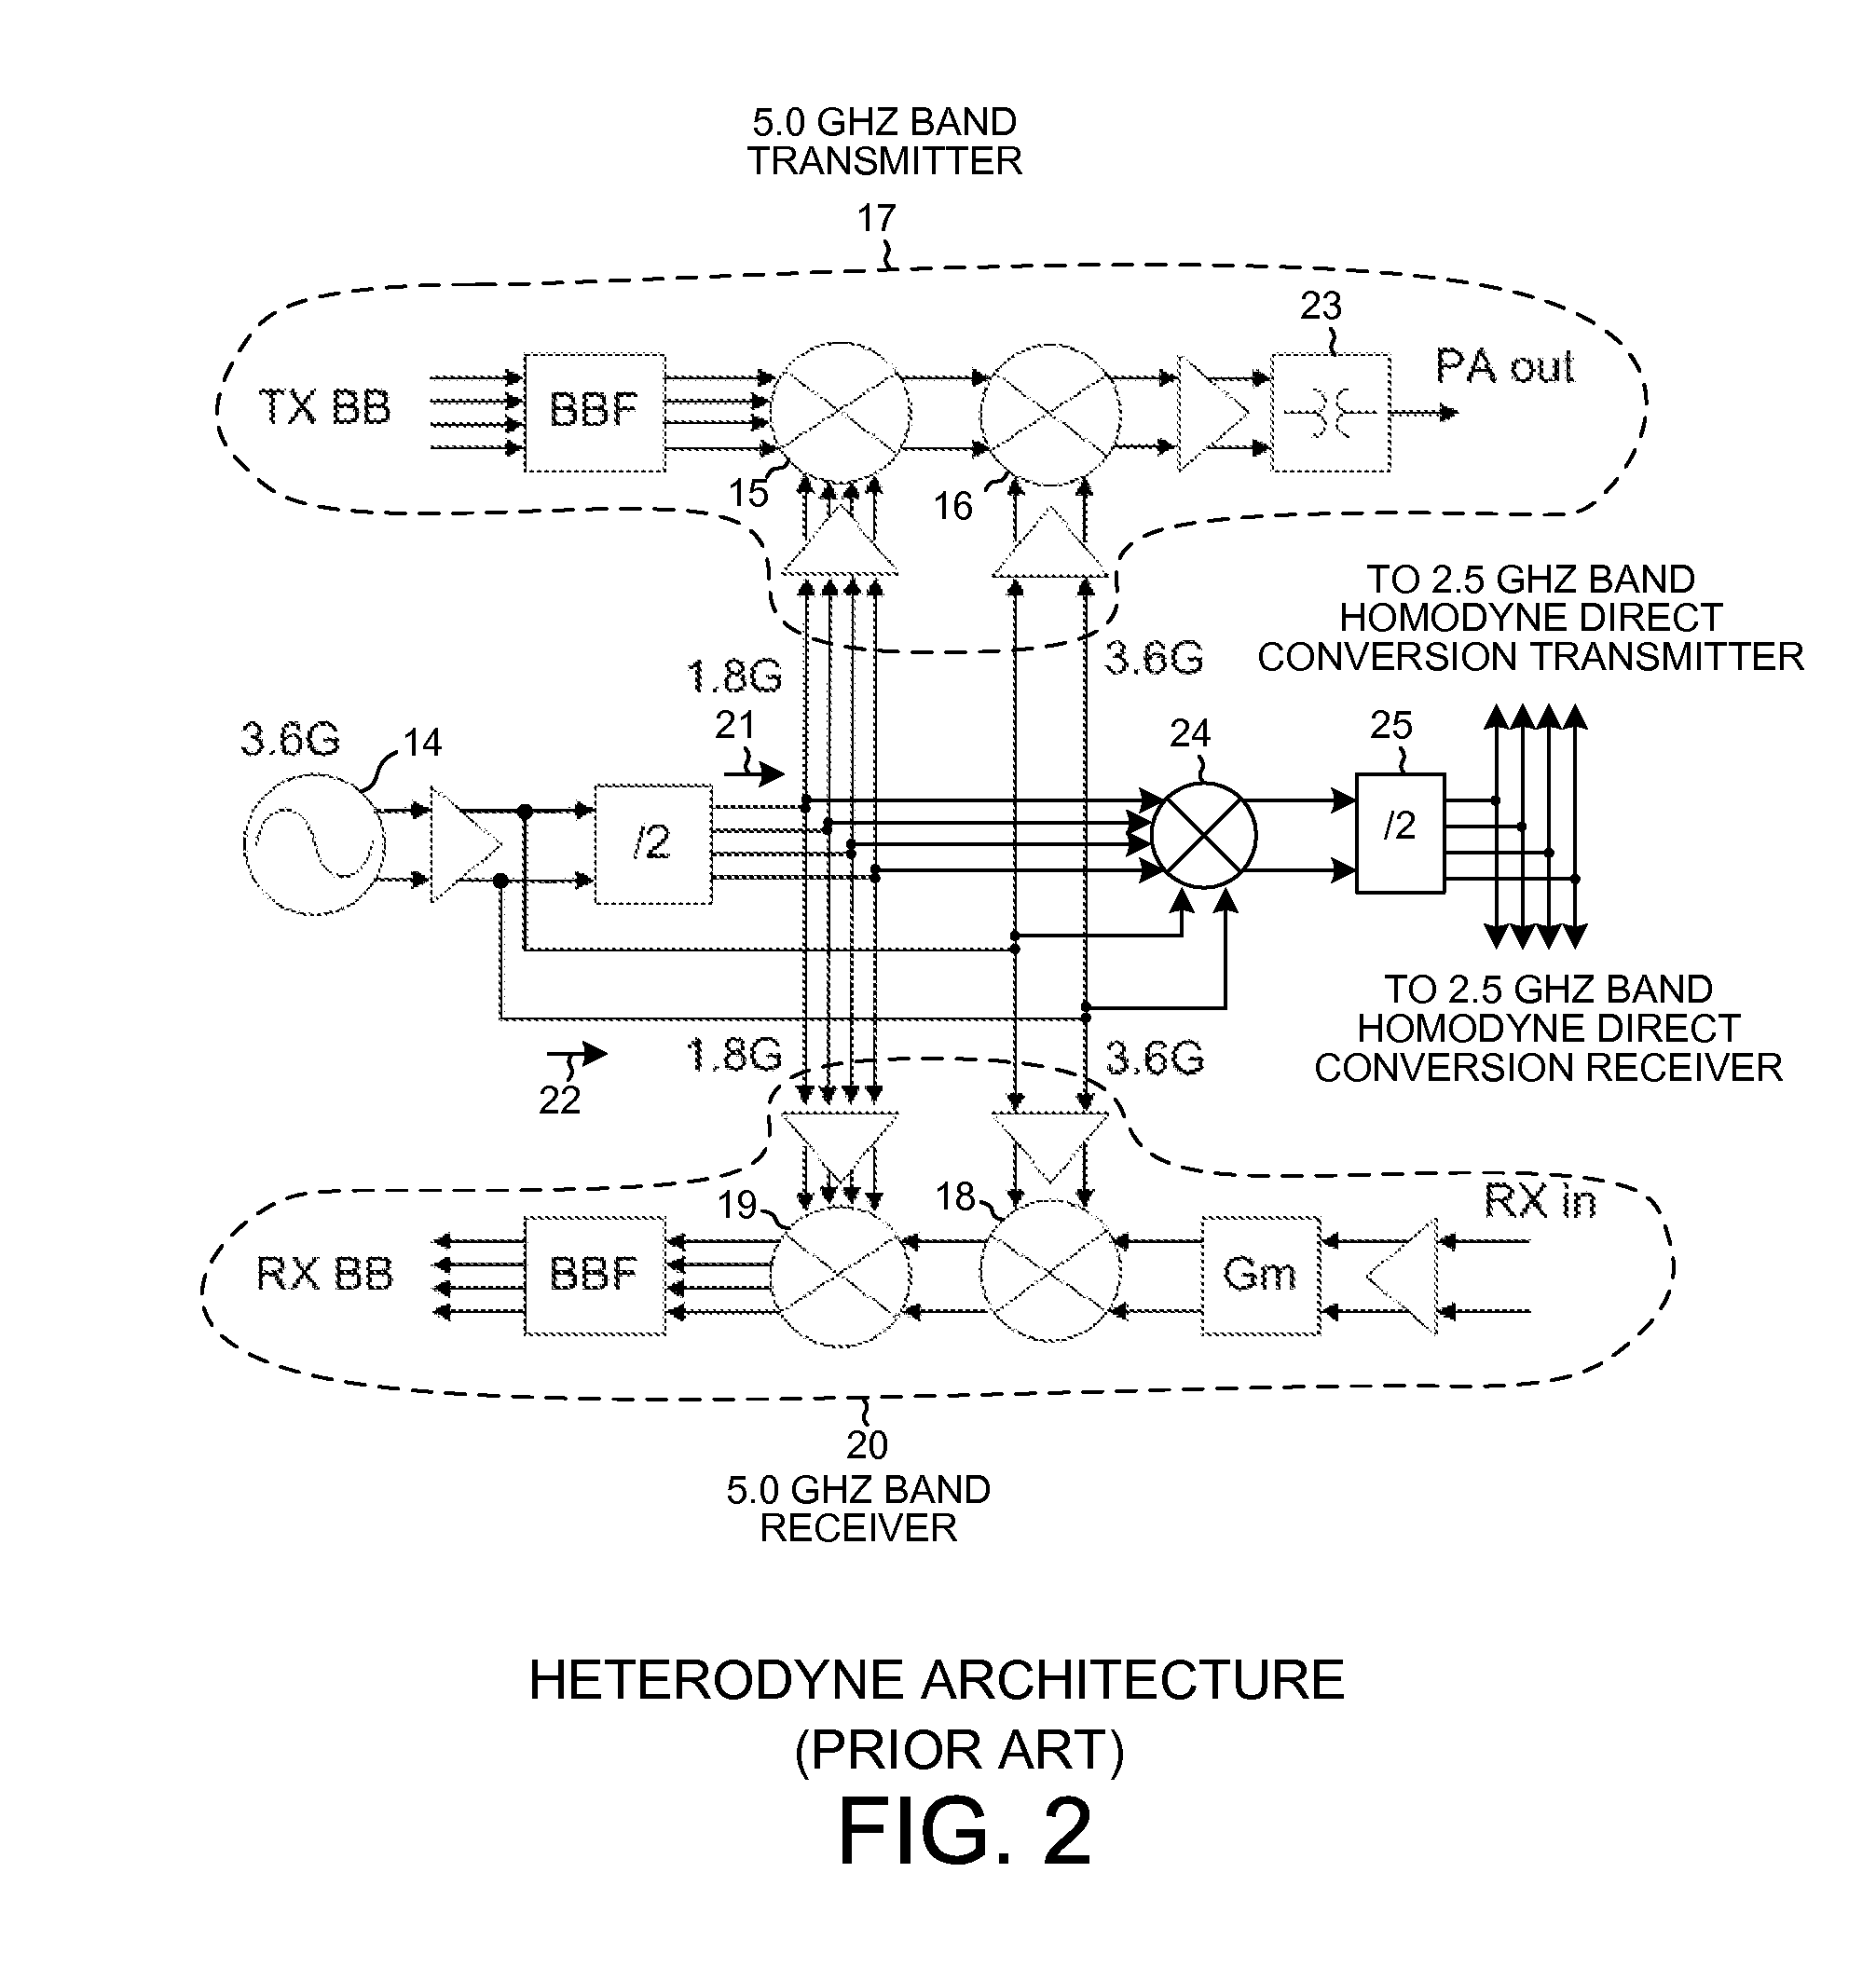 Lo generation and distribution in a multi-band transceiver